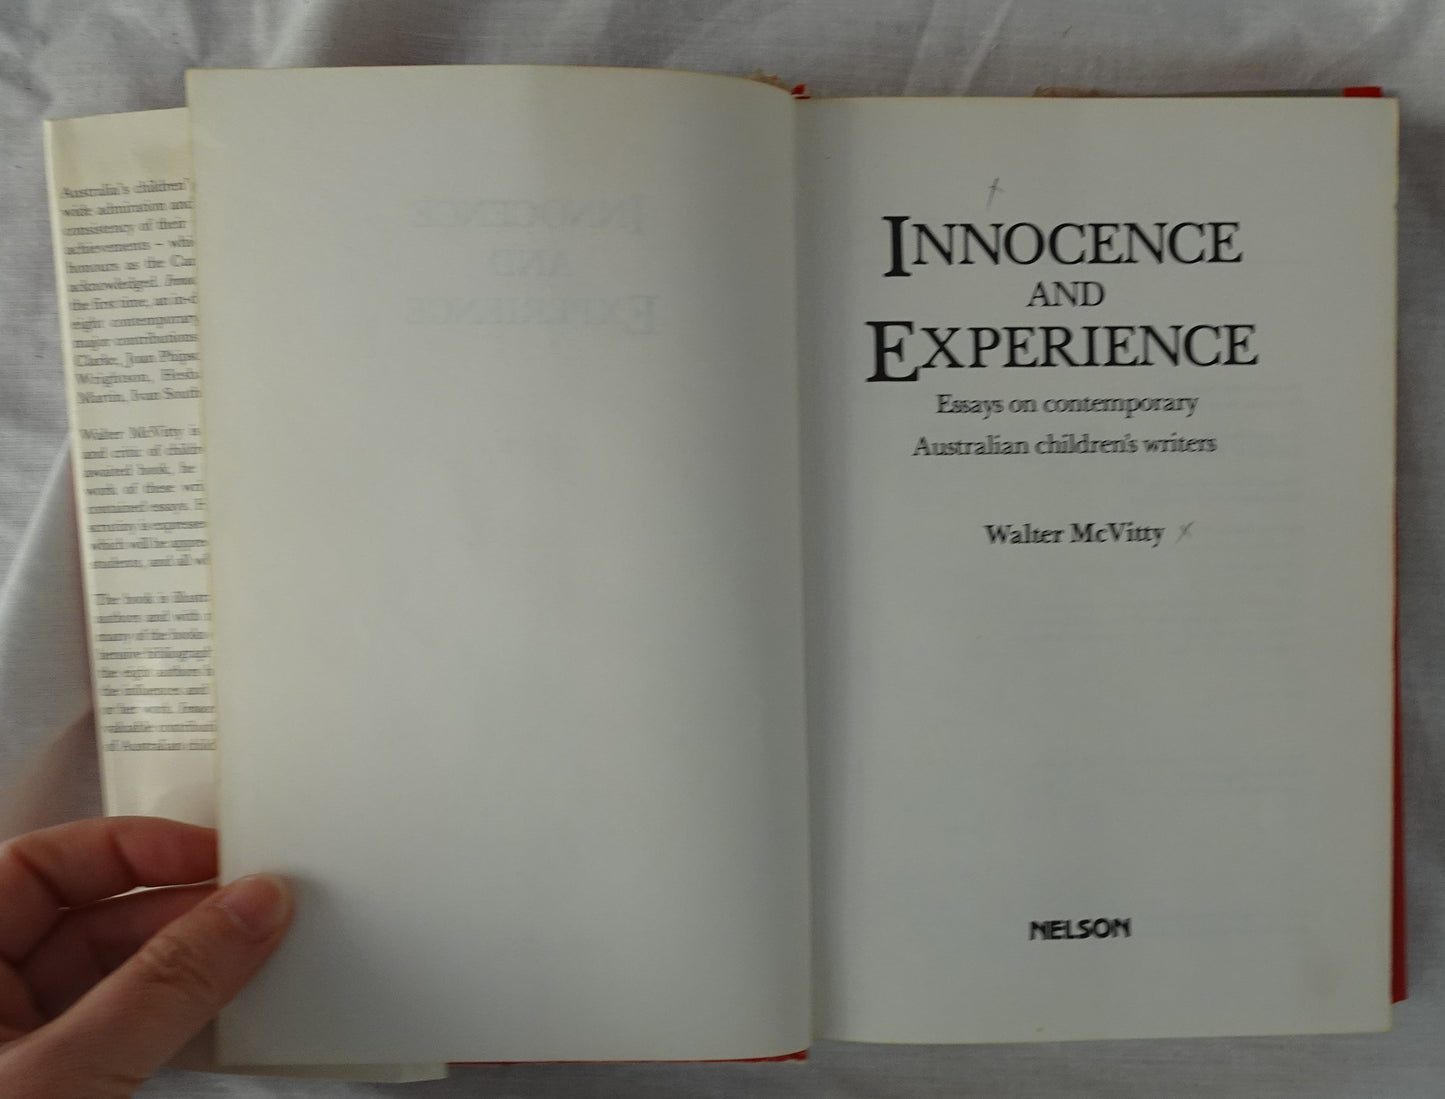 Innocence and Experience by Walter McVitty